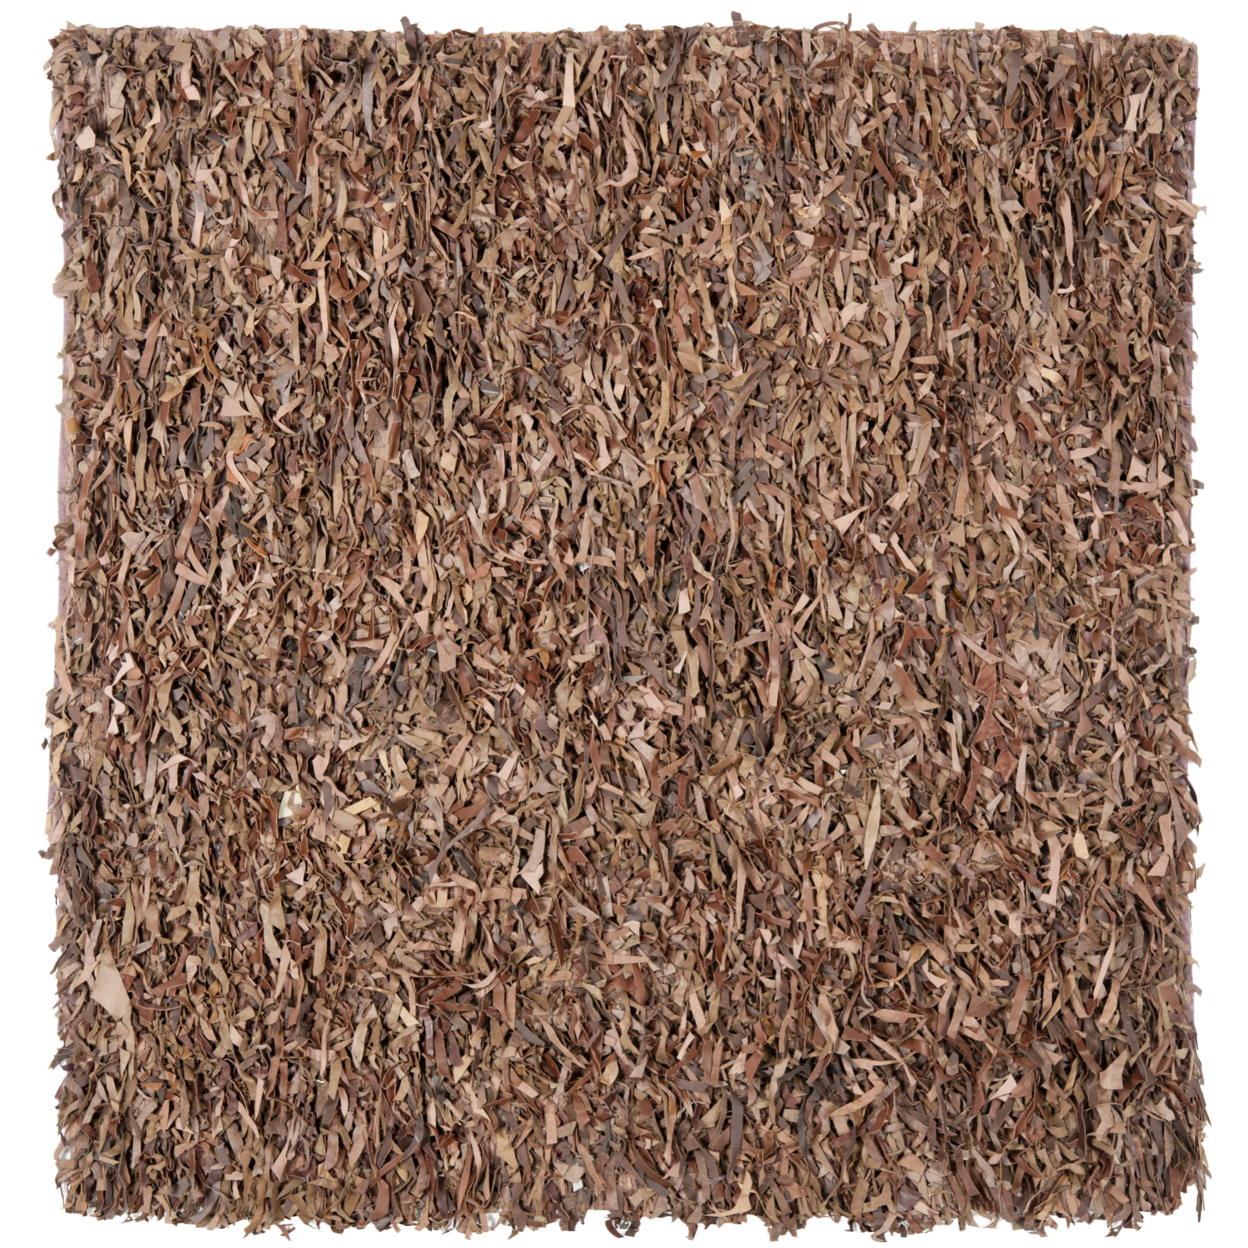 SAFAVIEH Leather Shag LSG511K Hand-knotted Brown Rug - 8' Square